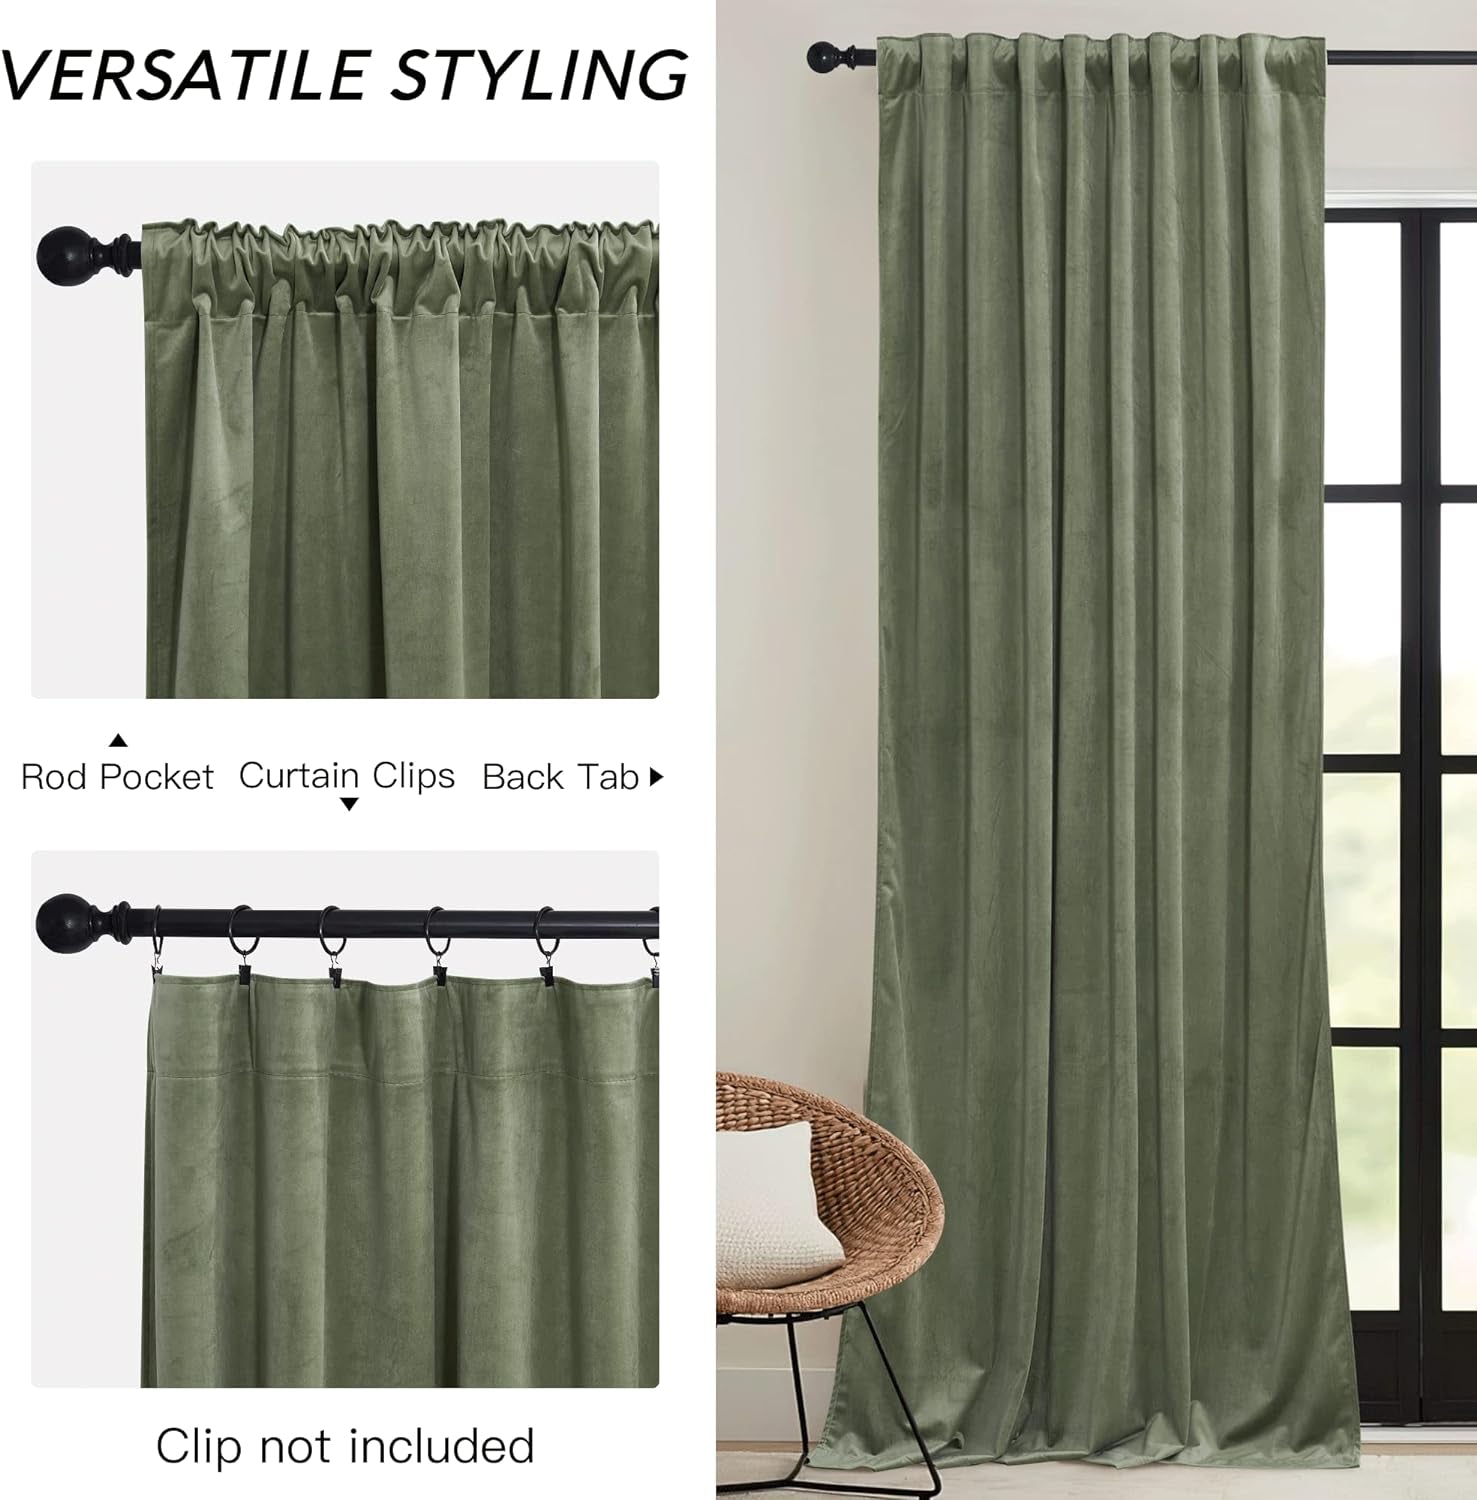 RYB HOME Sage Green Velvet Curtains 84 Inch, Room Darkening Super Soft Velvet Drapes for Living Room Thermal Insulated Pleat Tapes Window Treatment for Bedroom Playroom, W52 X L84 Inch, 2 Panels  RYB HOME   